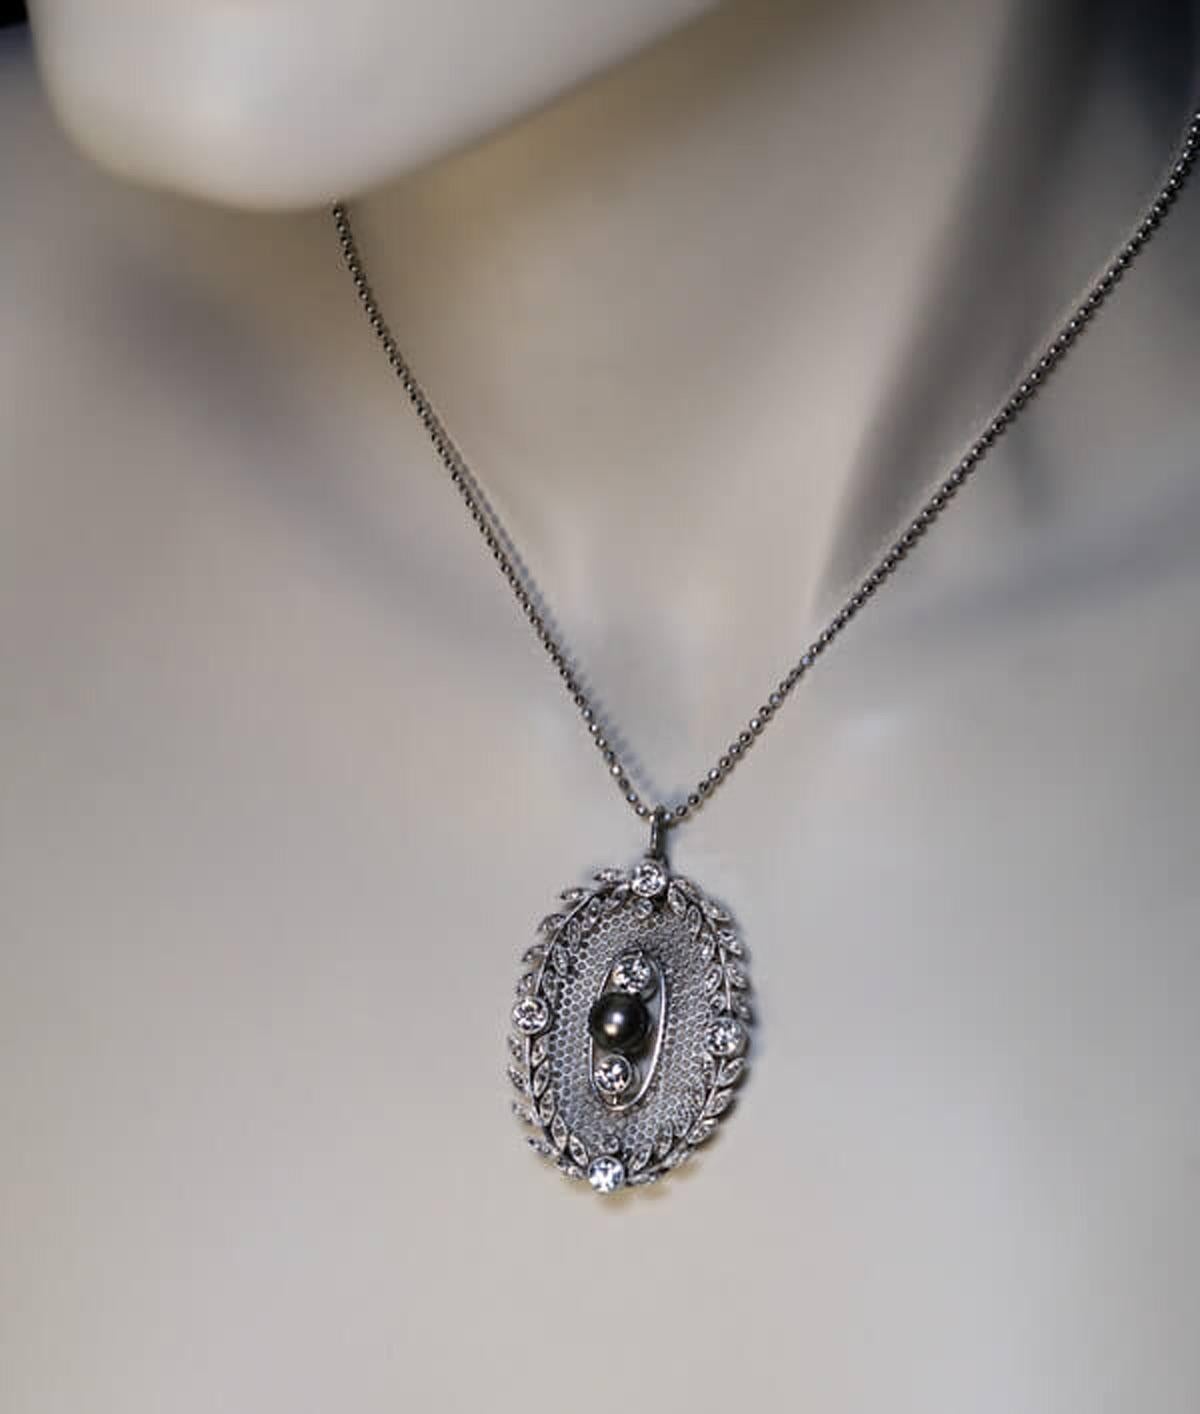 Circa 1910

This antique handcrafted platinum pendant is centered with a 7 mm natural greenish gray pearl vertically flanked by two old European cut diamonds, all of which are inserted into an openwork honeycomb oval panel surrounded by a garland